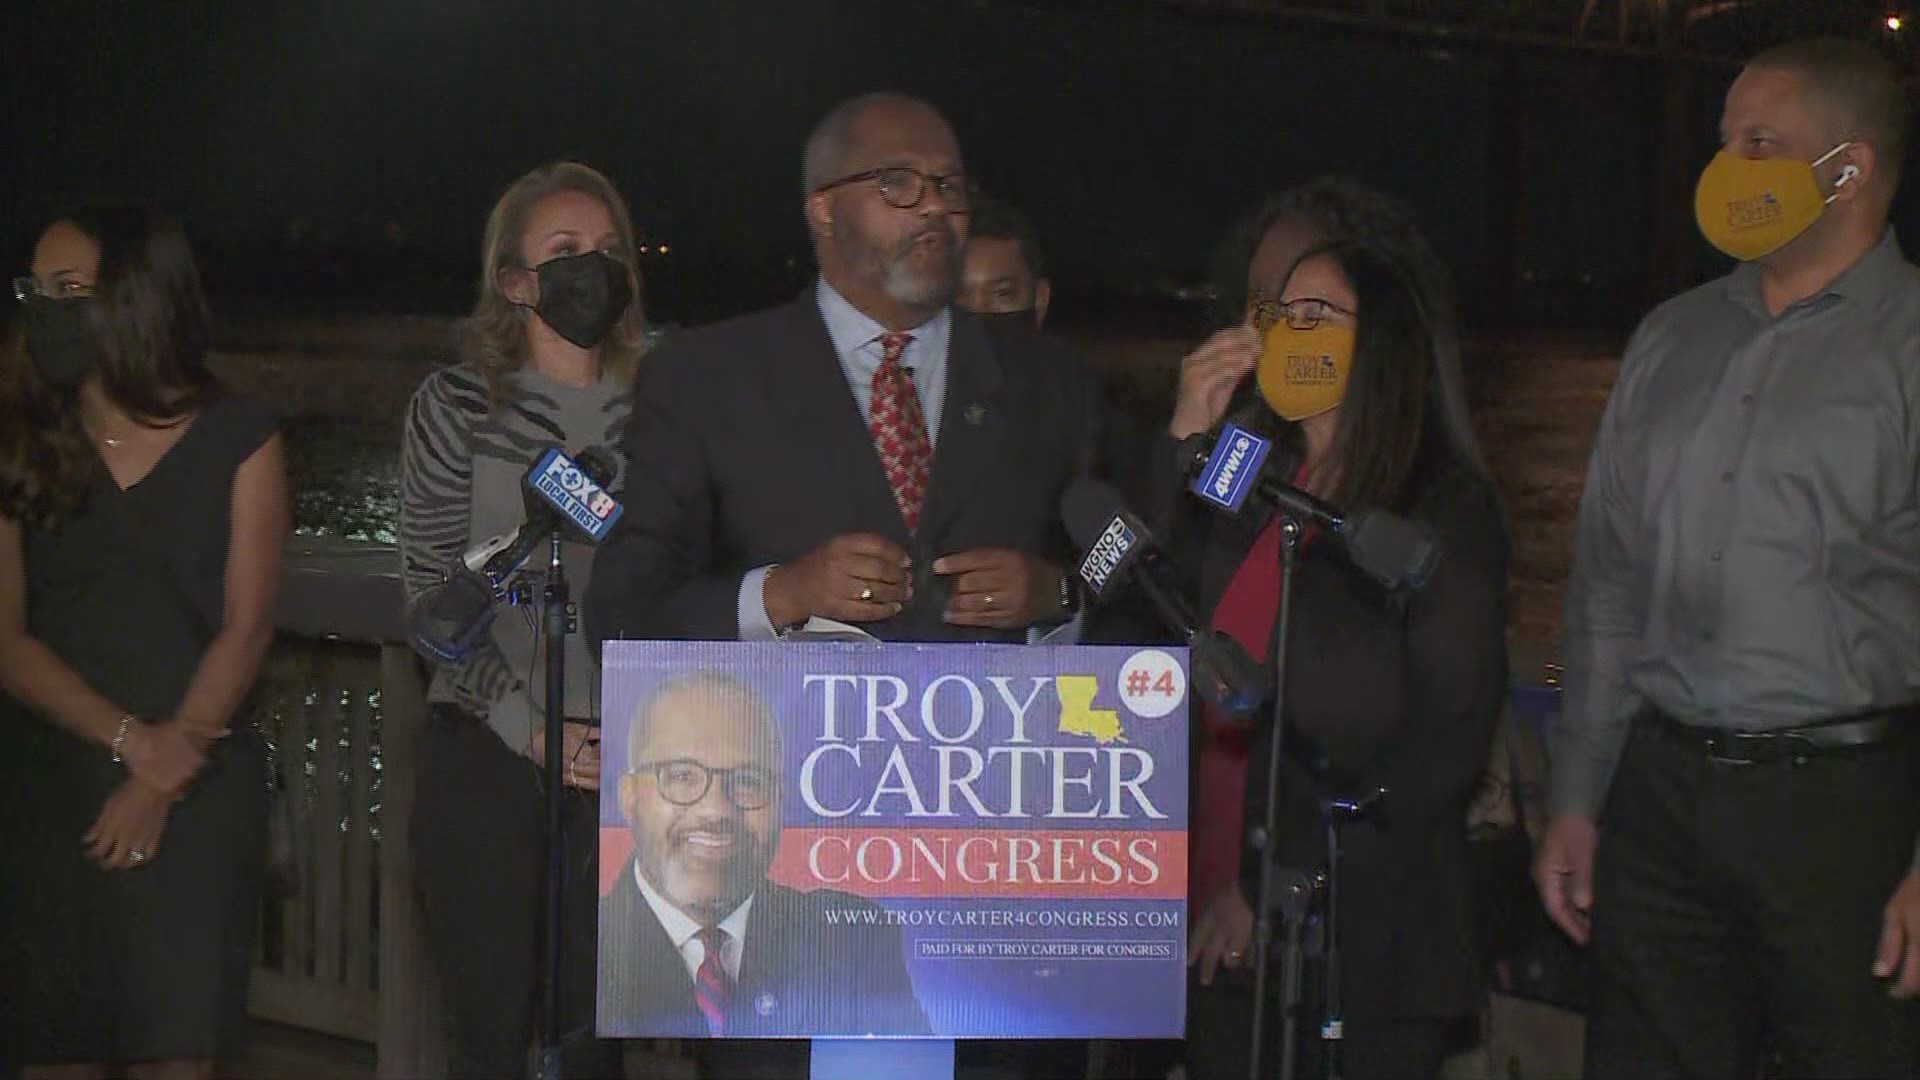 "What a night," said Troy Carter. "I am truly humbled and honored for the show of support from this district."